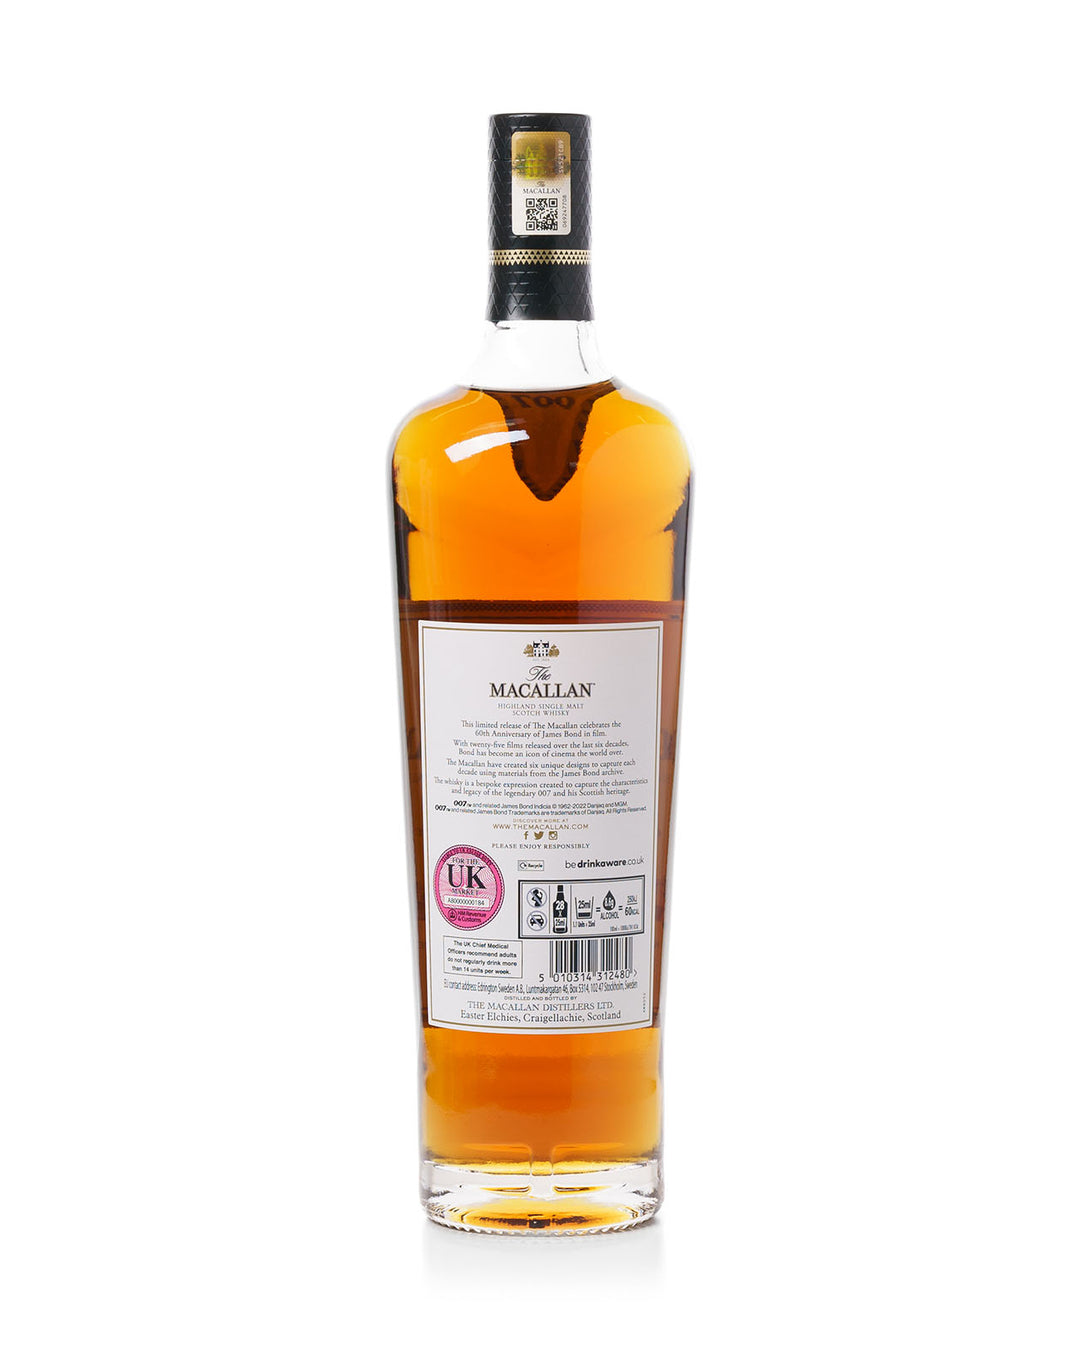 Macallan James Bond 60th Anniversary Release Decade III Bottled 2022 With Original Tube